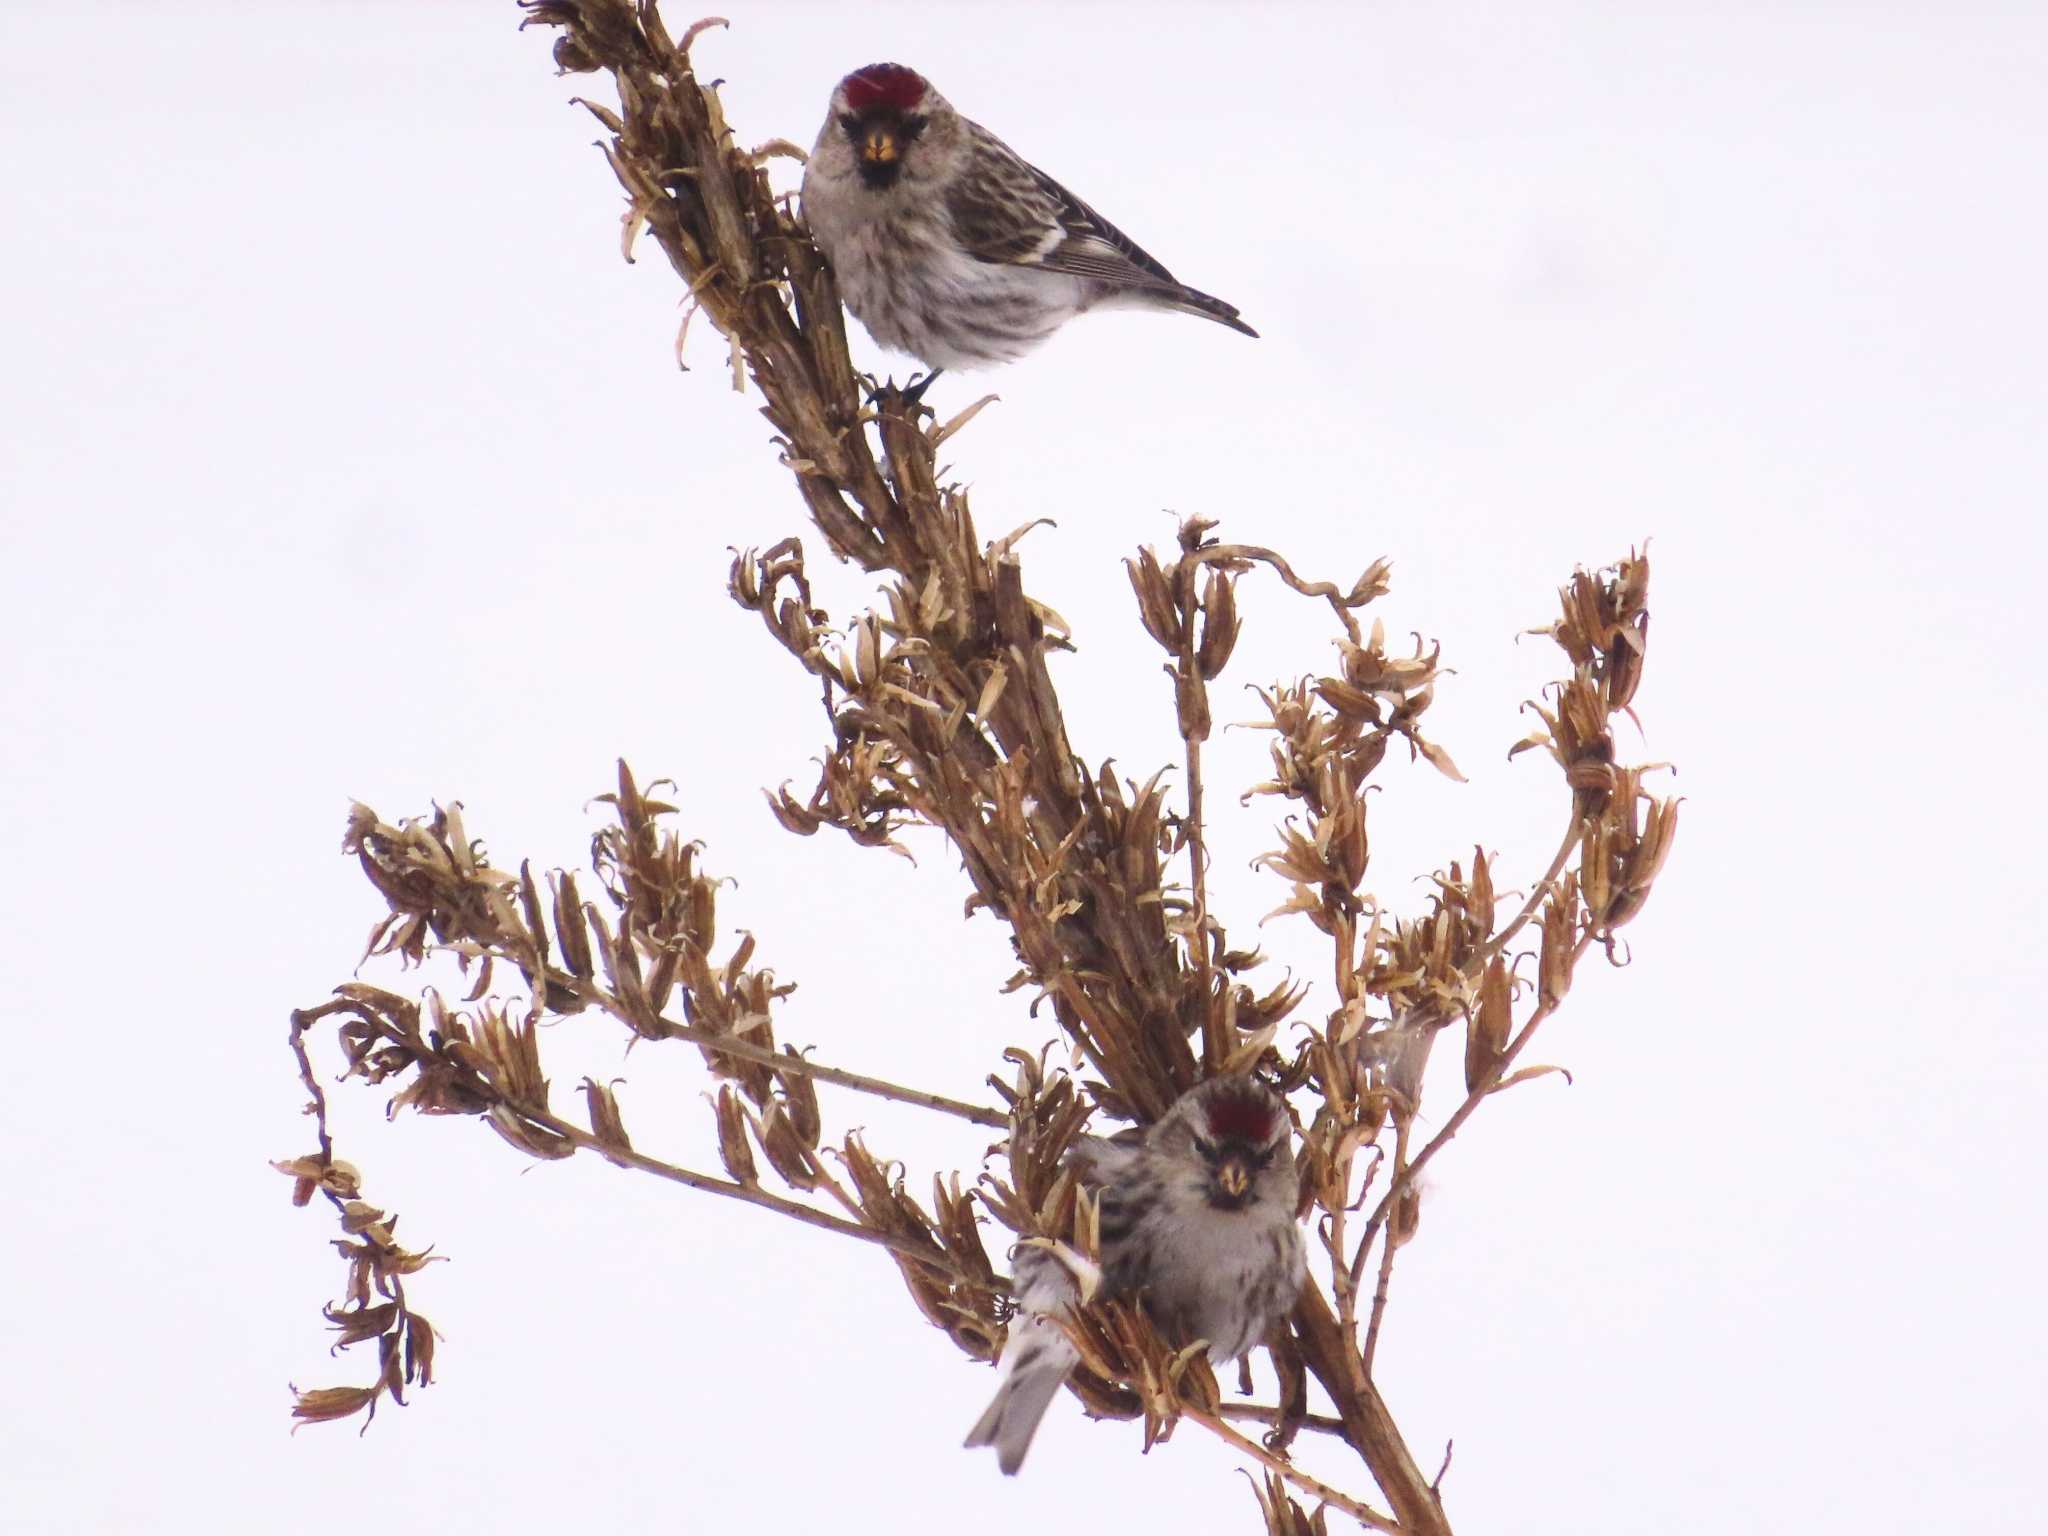 Photo of Common Redpoll at Makomanai Park by ゆ